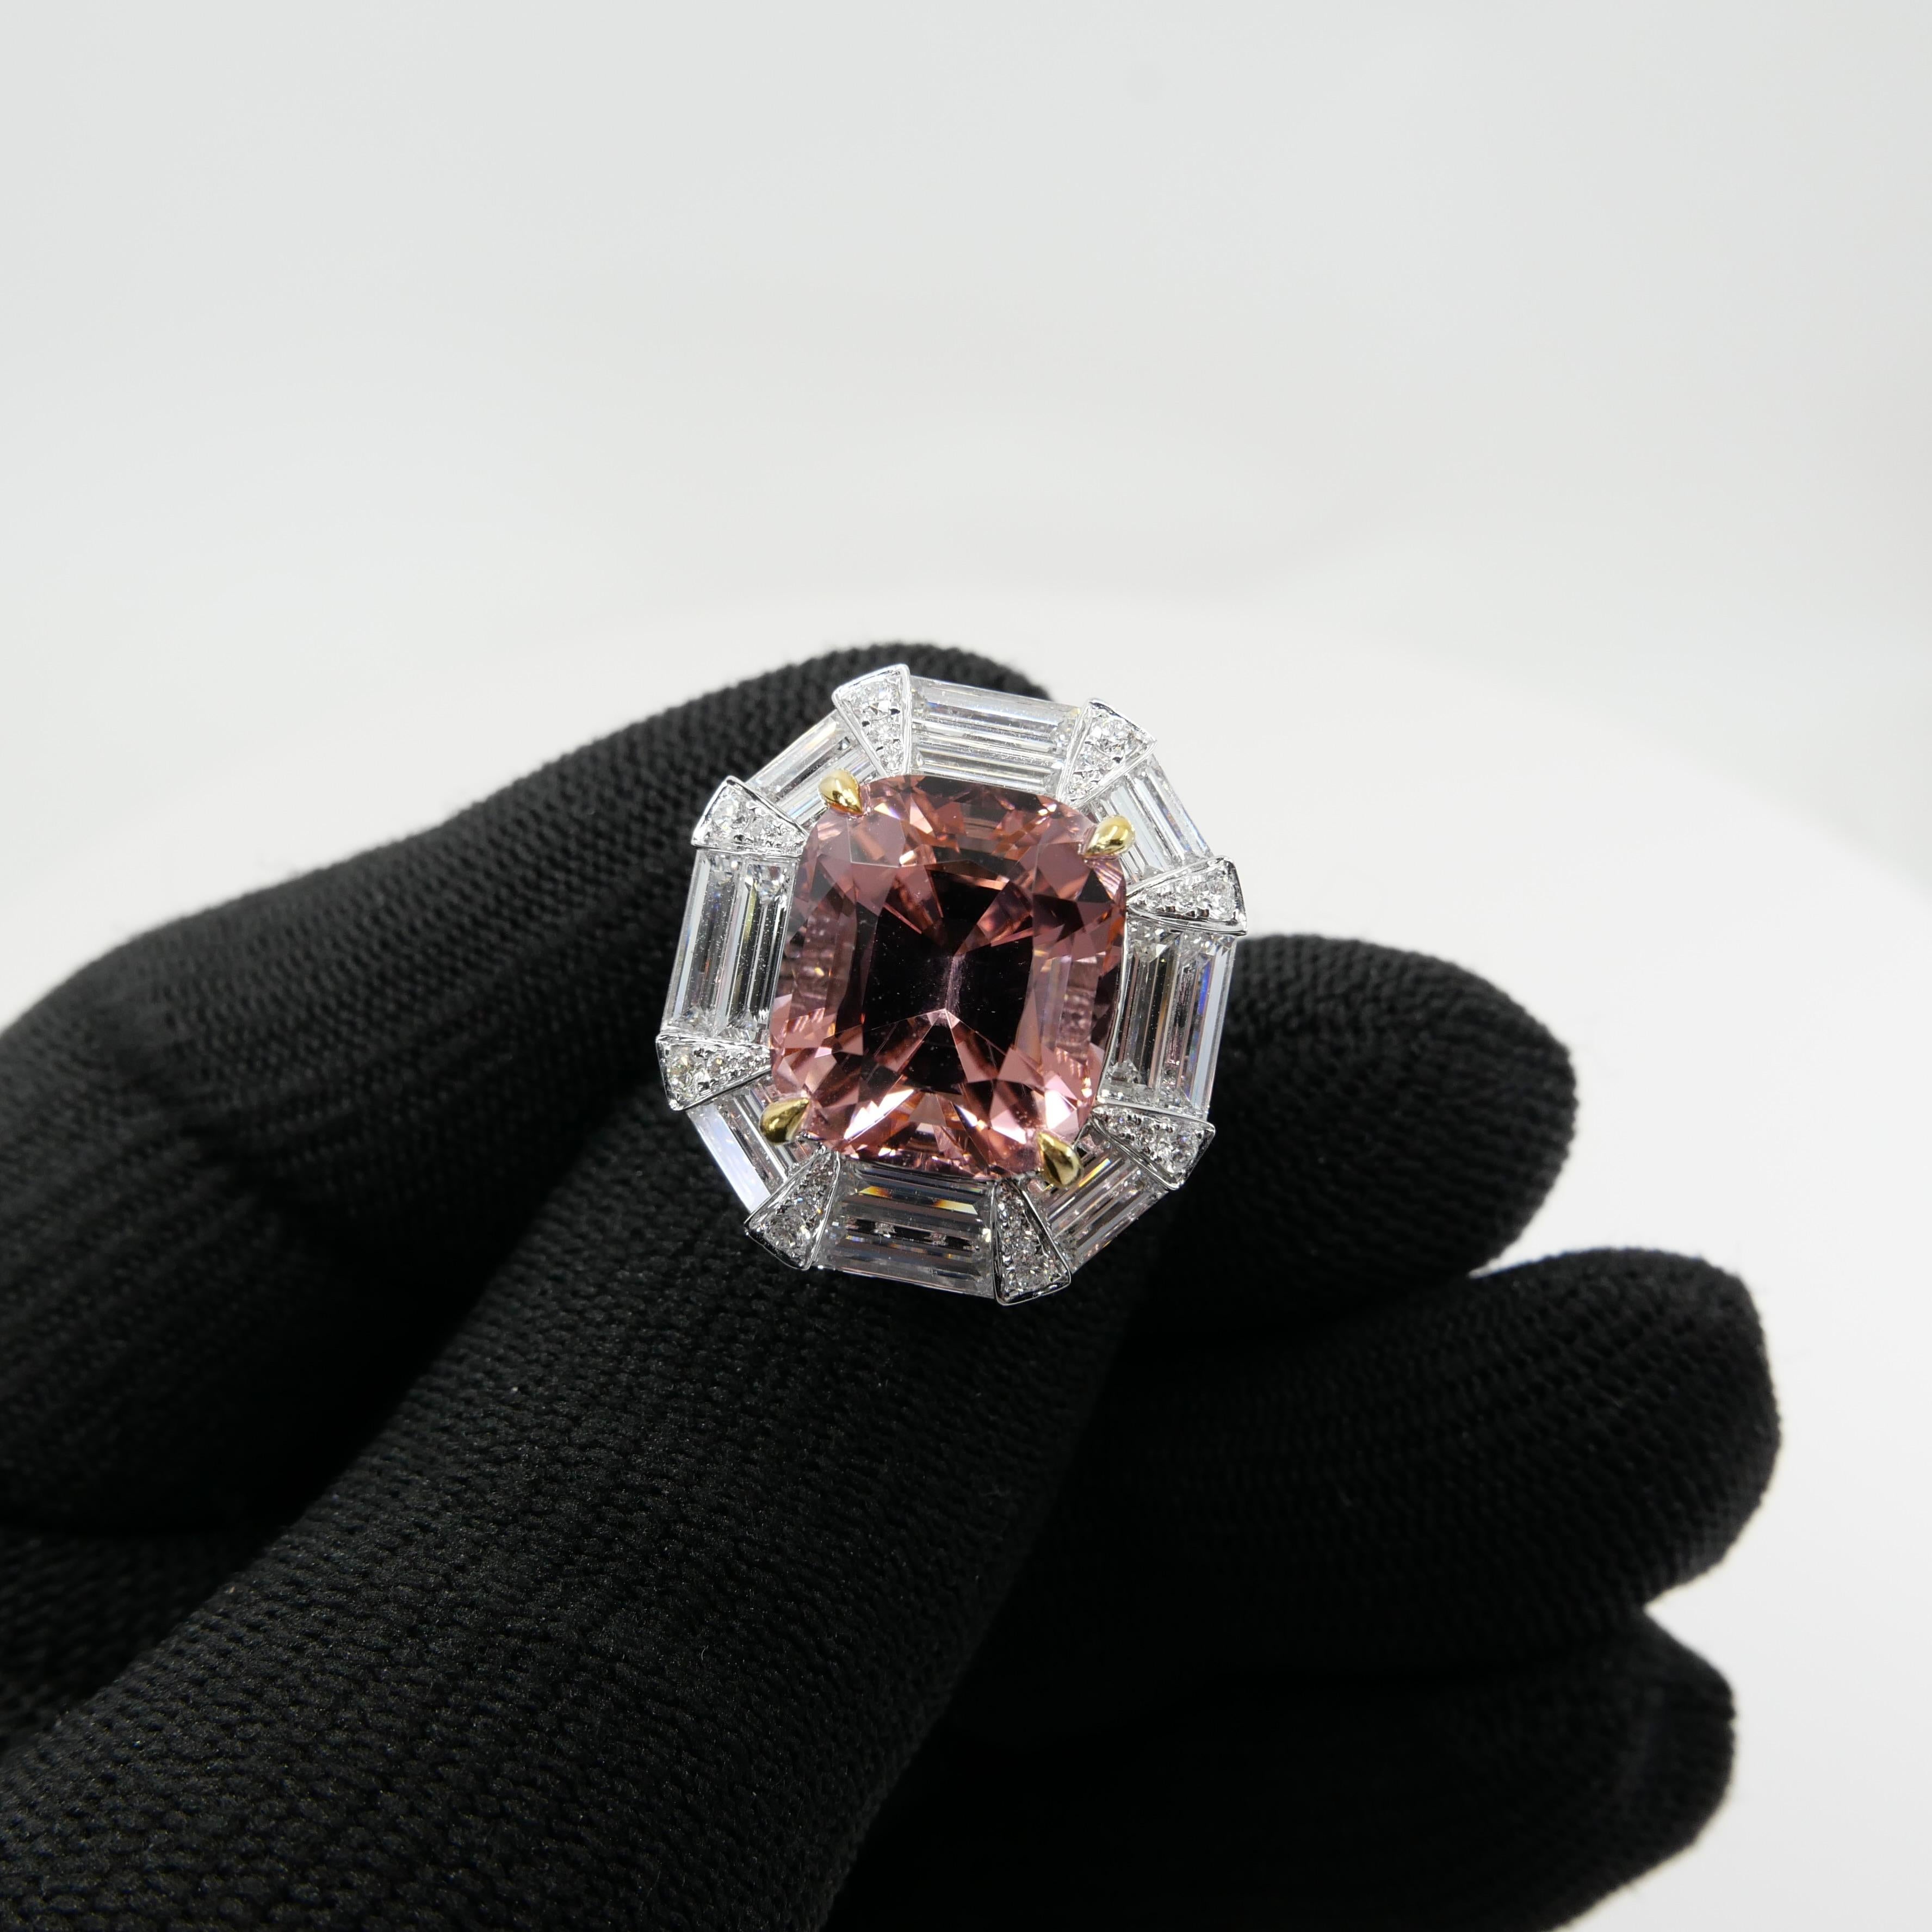 Contemporary GIA Certified 10.43 Carat Pink Tourmaline & Diamond Ring, Huge Statement Piece For Sale